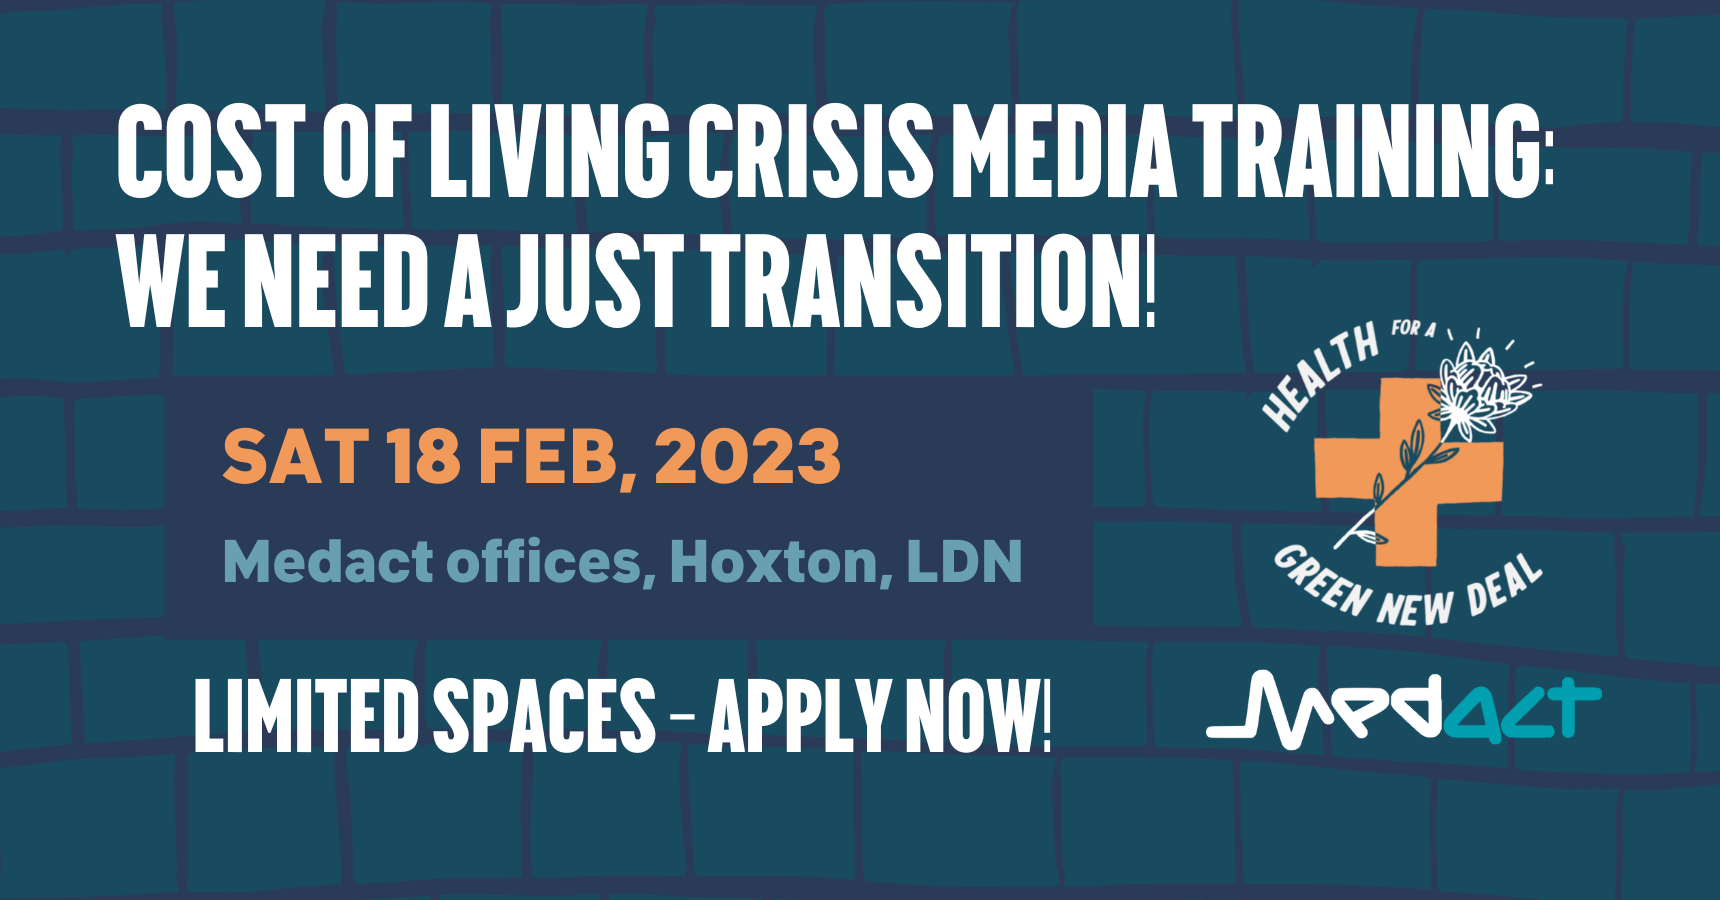 Cost of living crisis media training: We need a just transition! SAT 18 FEB, 2023. Limited spaces – apply now! Health for a Green New Deal / Medact